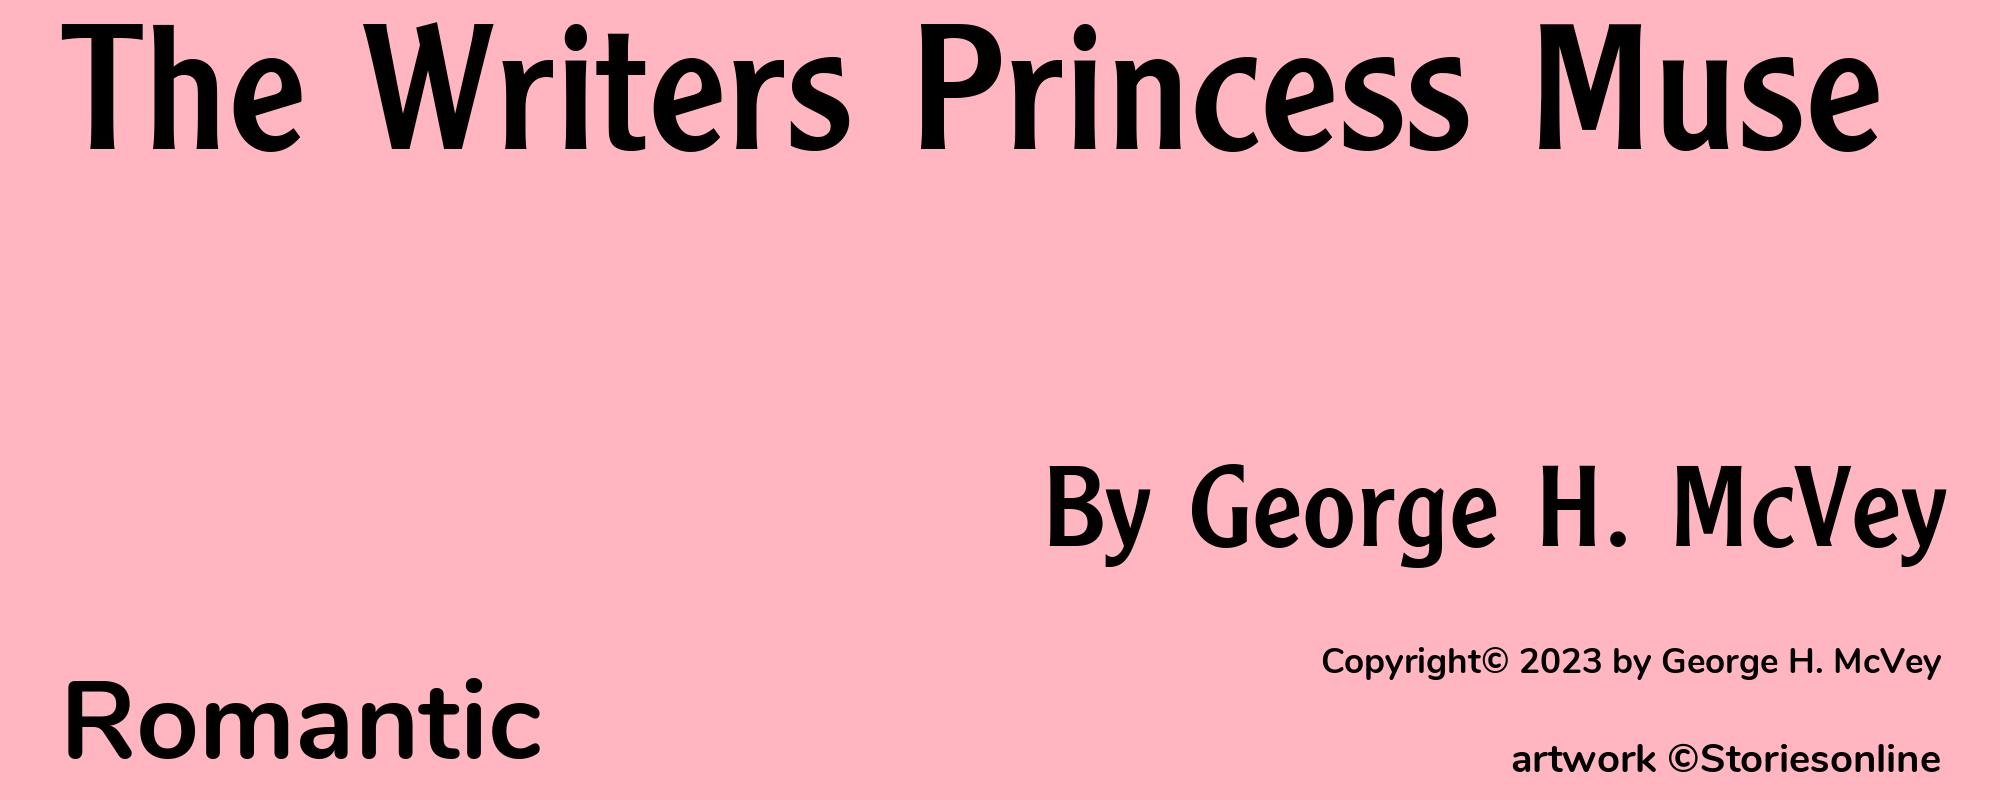 The Writers Princess Muse - Cover